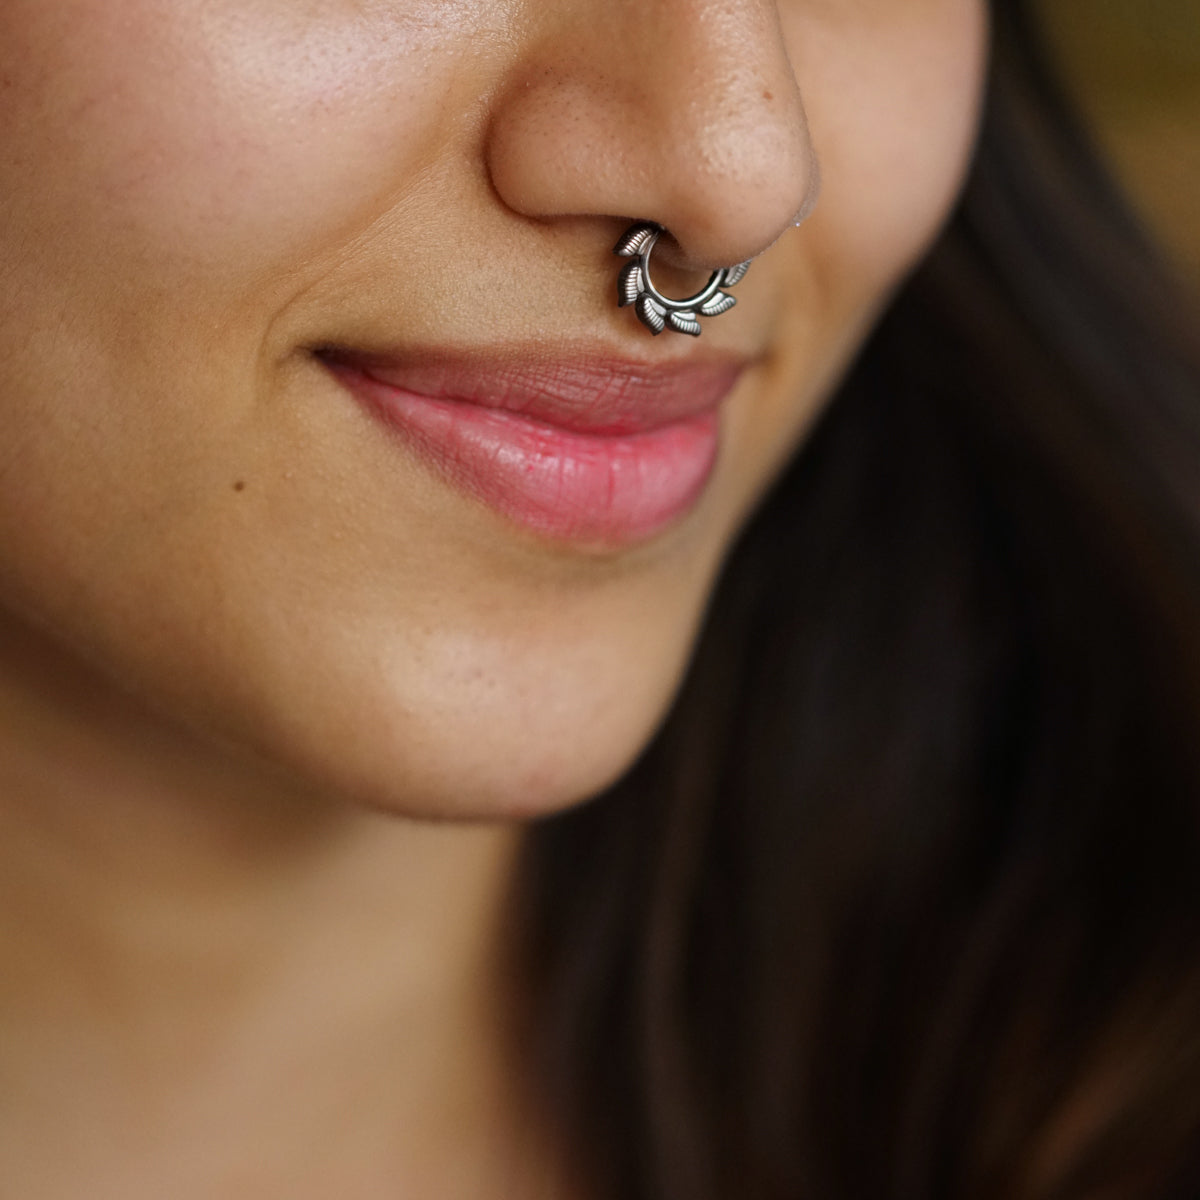 New nose Piercing - caring for it? | Beautylish